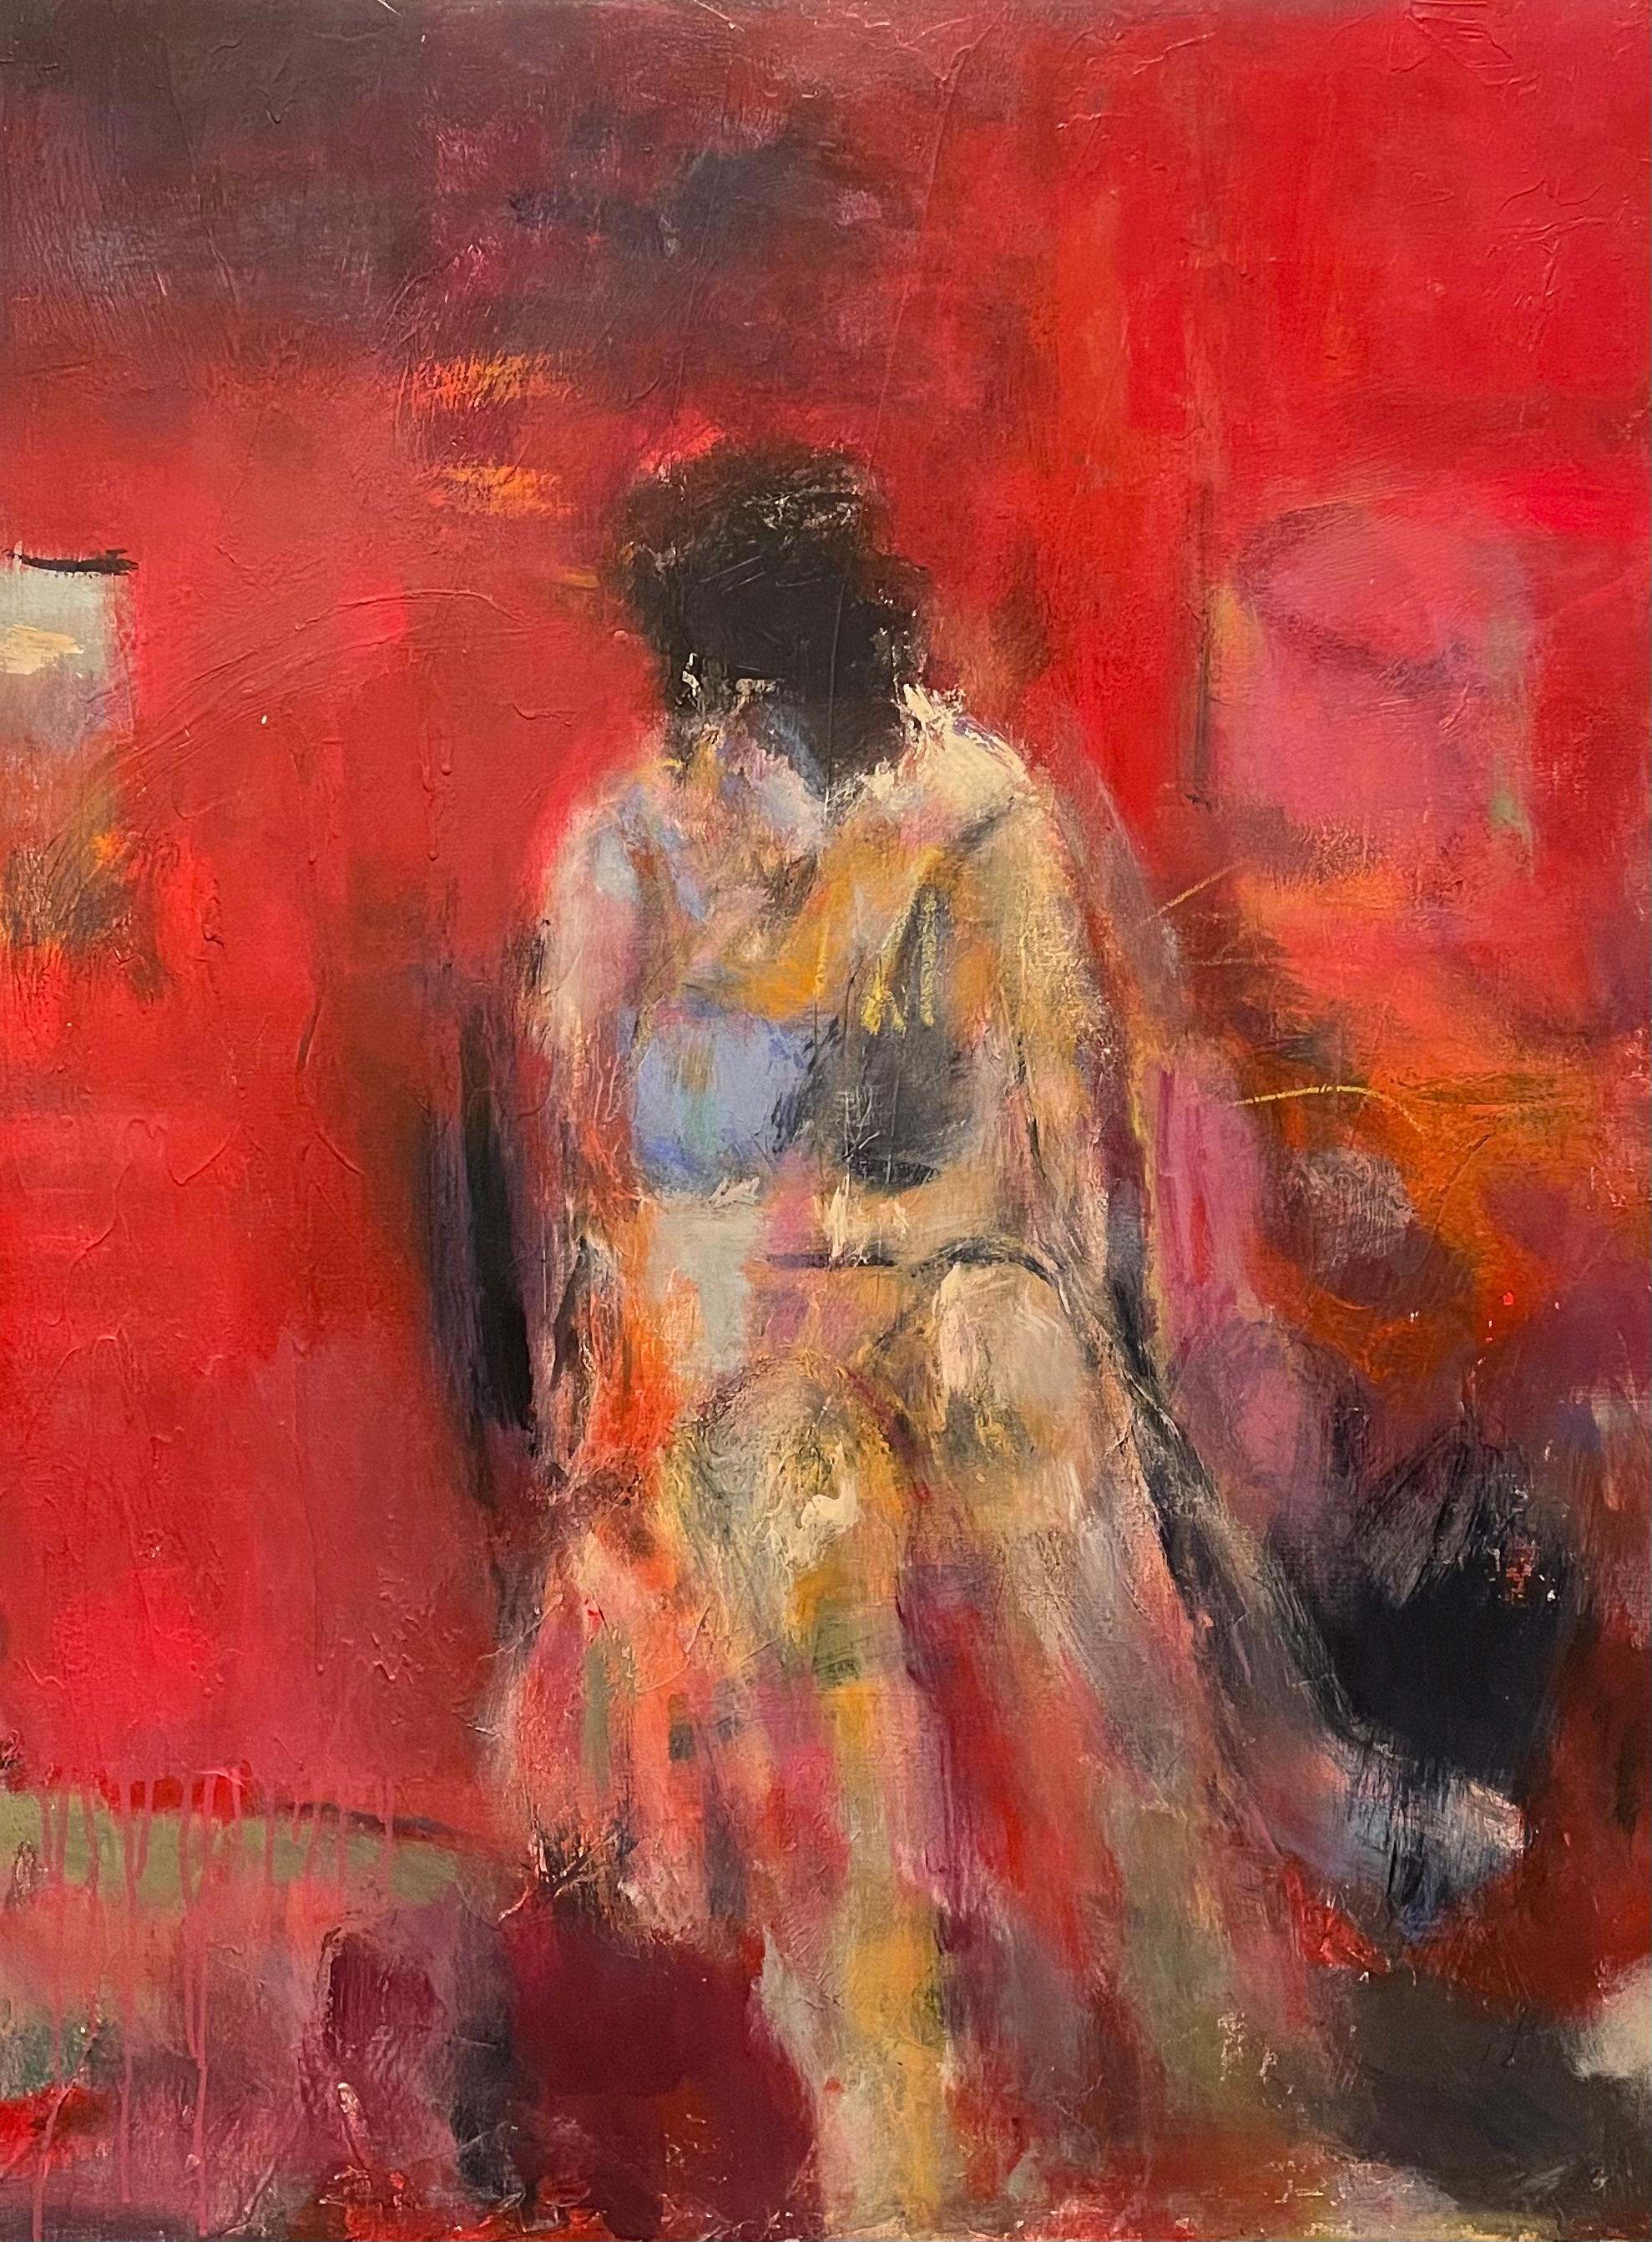 This piece titled "Reflection" by Helen Steele is a stirring example of contemporary figurative abstract expressionism. Rendered in a 40" x 30" mixed media canvas, it features a lone figure immersed in deep reds, symbolizing passion, energy, or